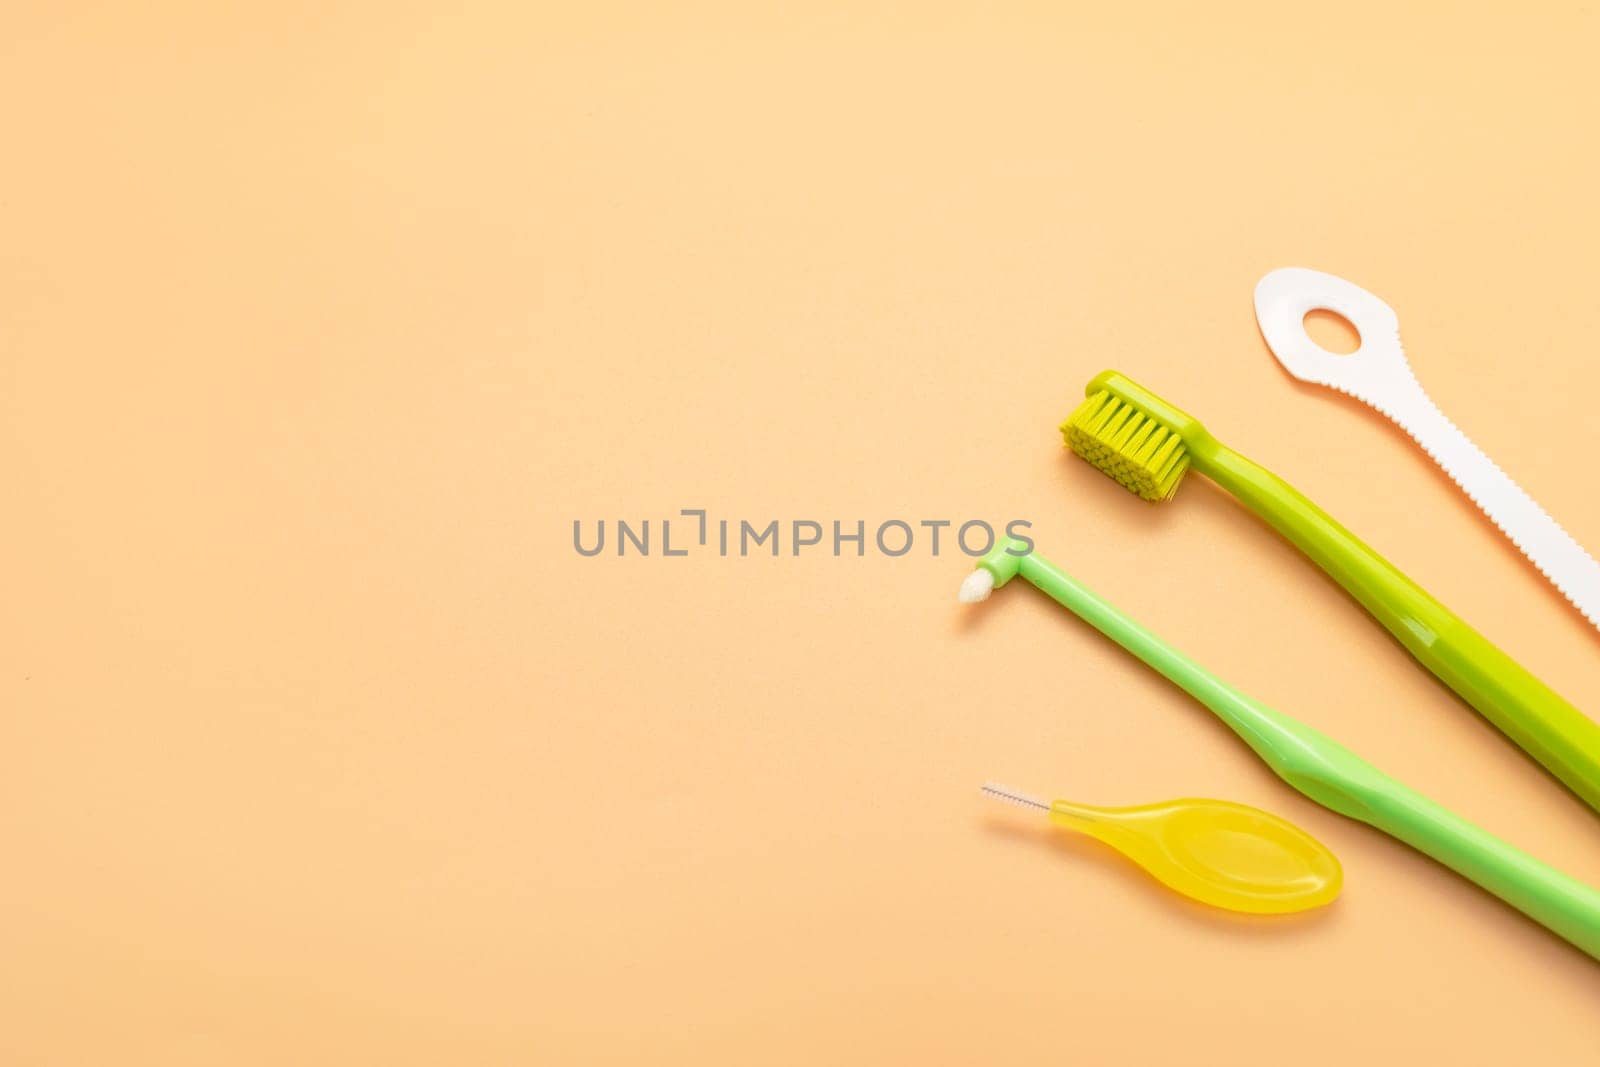 Design Individual Dental Oral Hygiene Set Kit. Dentistry White Tongue Scraper, Toothbrush, Interdental Toothbrush For Cleaning Between Teeth On Peach Yellow Background. Copy Space Horizontal Plane